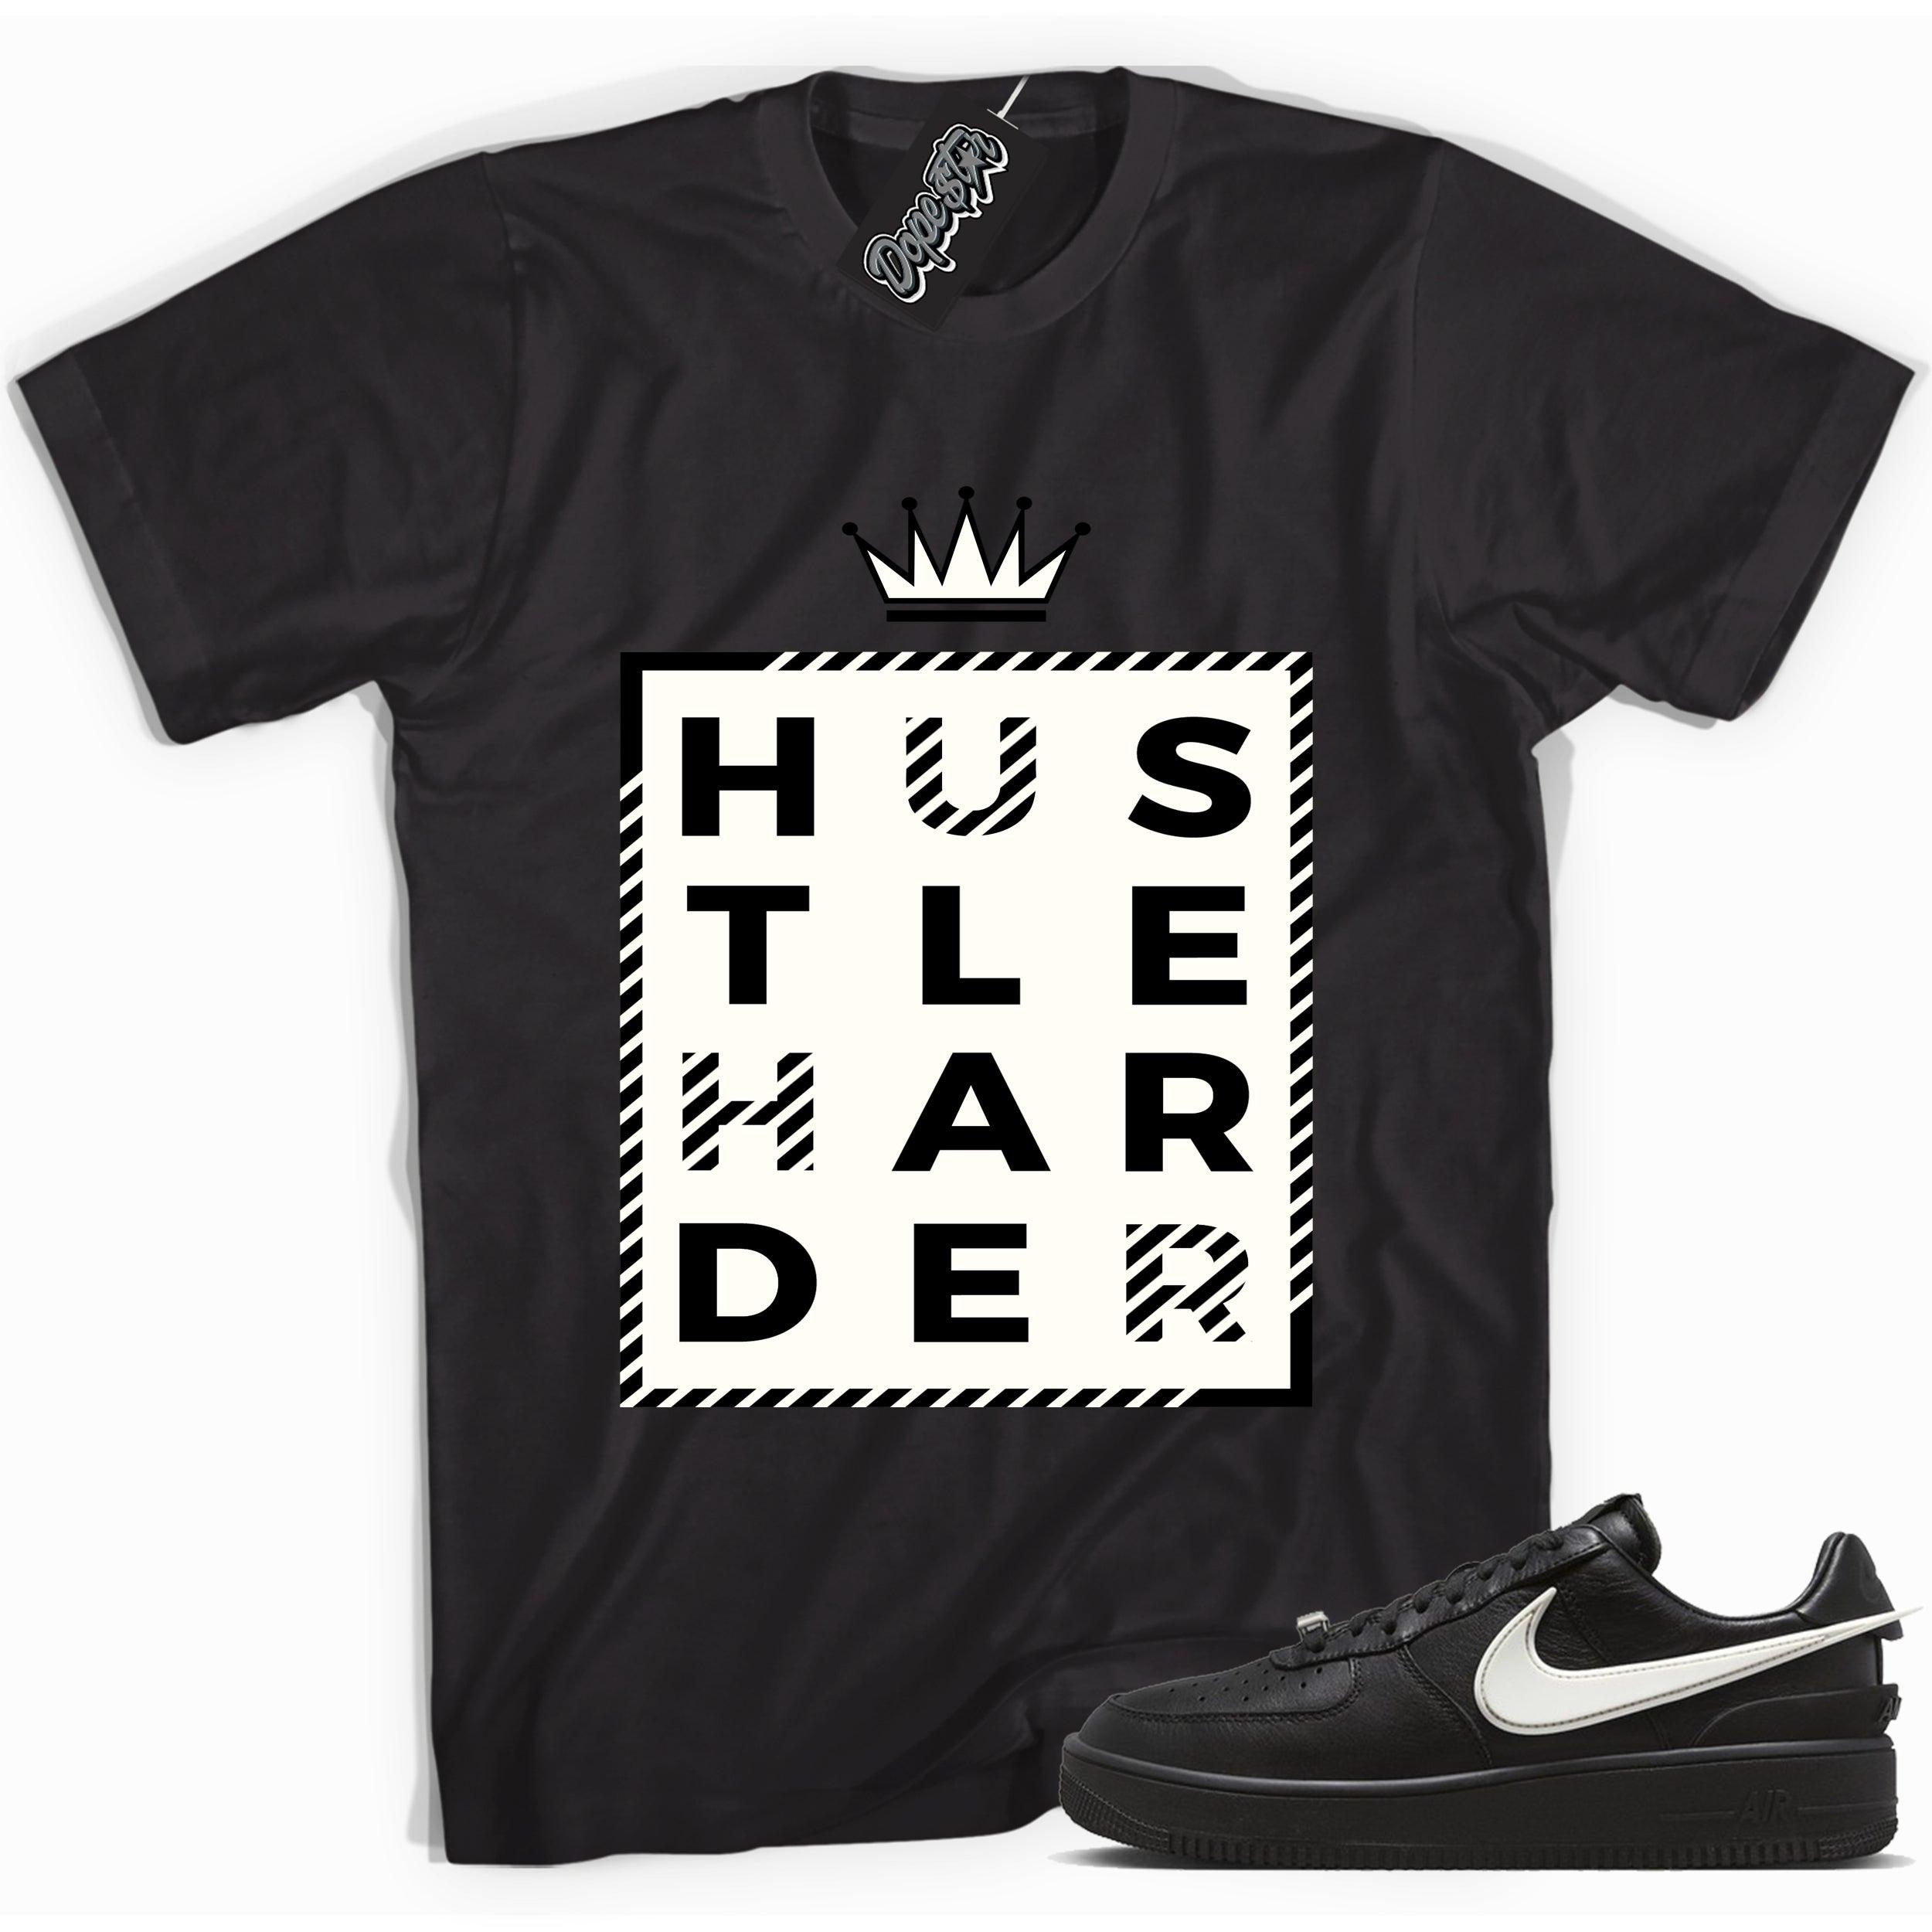 Cool black graphic tee with 'hustle harder' print, that perfectly matches Nike Air Force 1 Low SP Ambush Phantom sneakers.